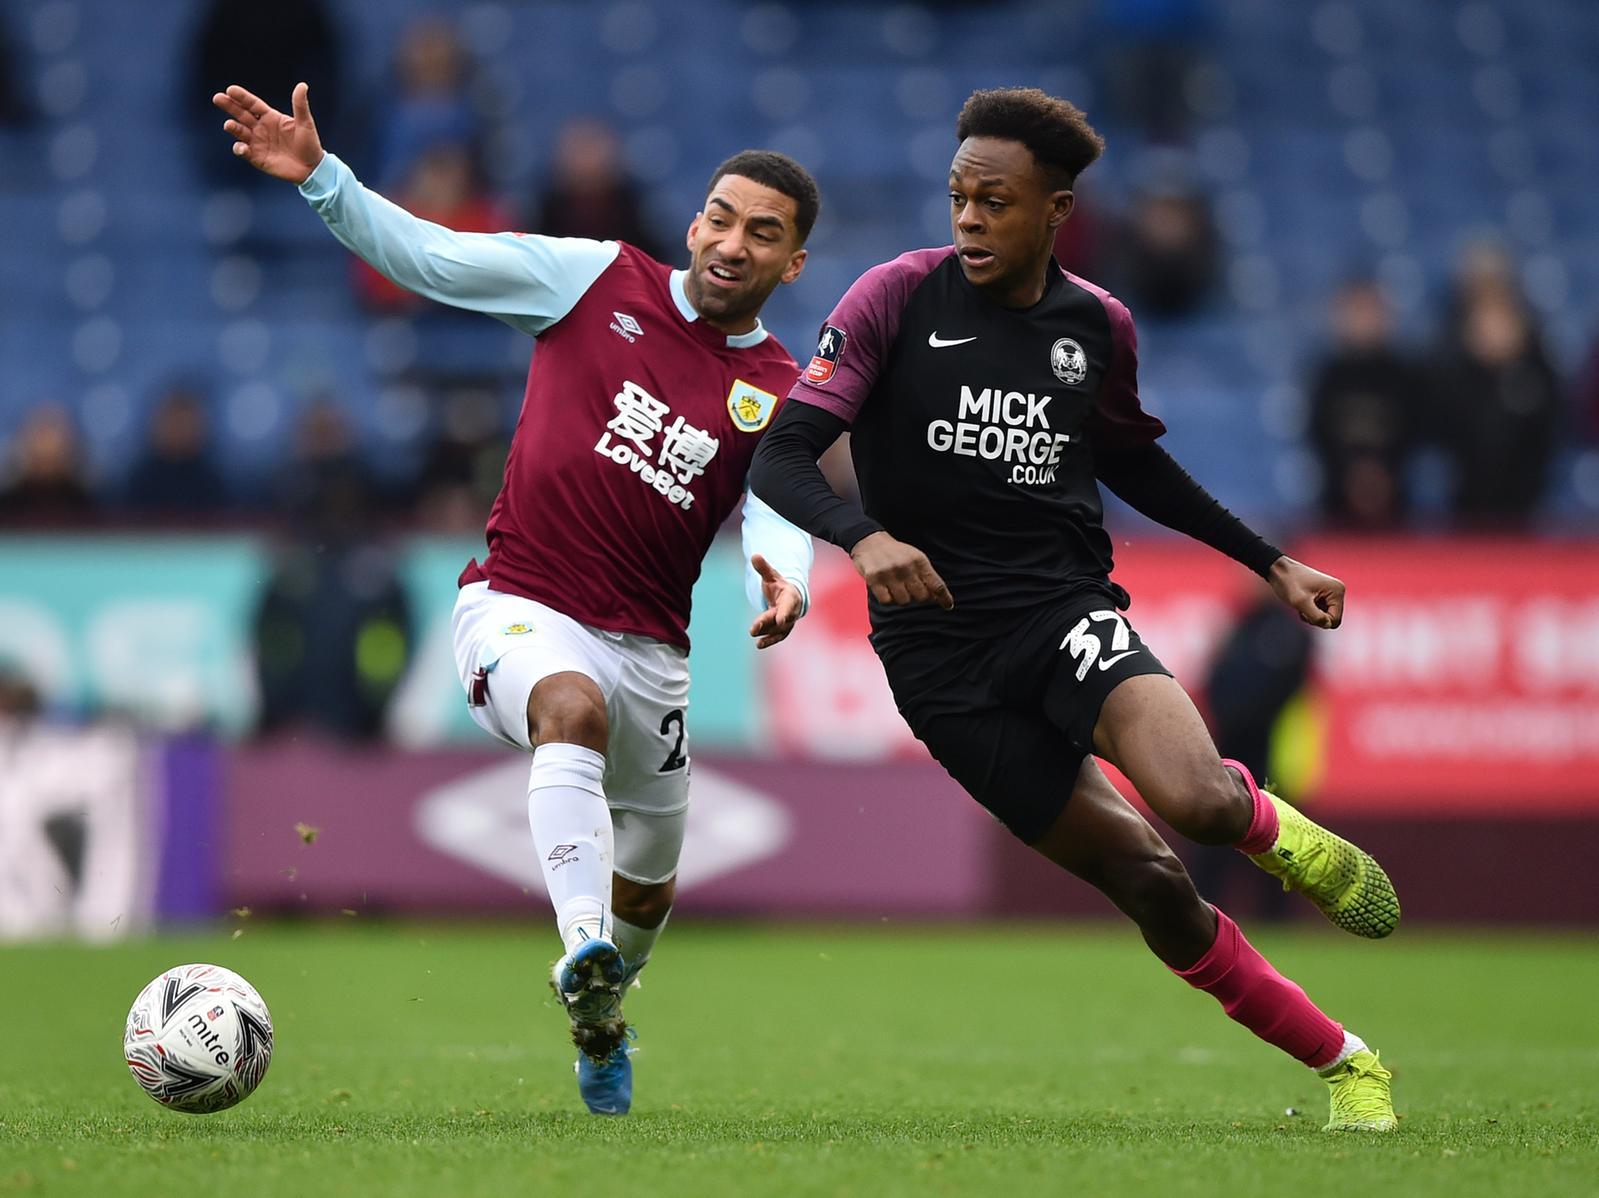 The former England international, who earned 21 caps for the Three Lions, has just one goal and four assists to his name since joining the club. He's made 36 starts for the Clarets and featured 14 times from the bench.